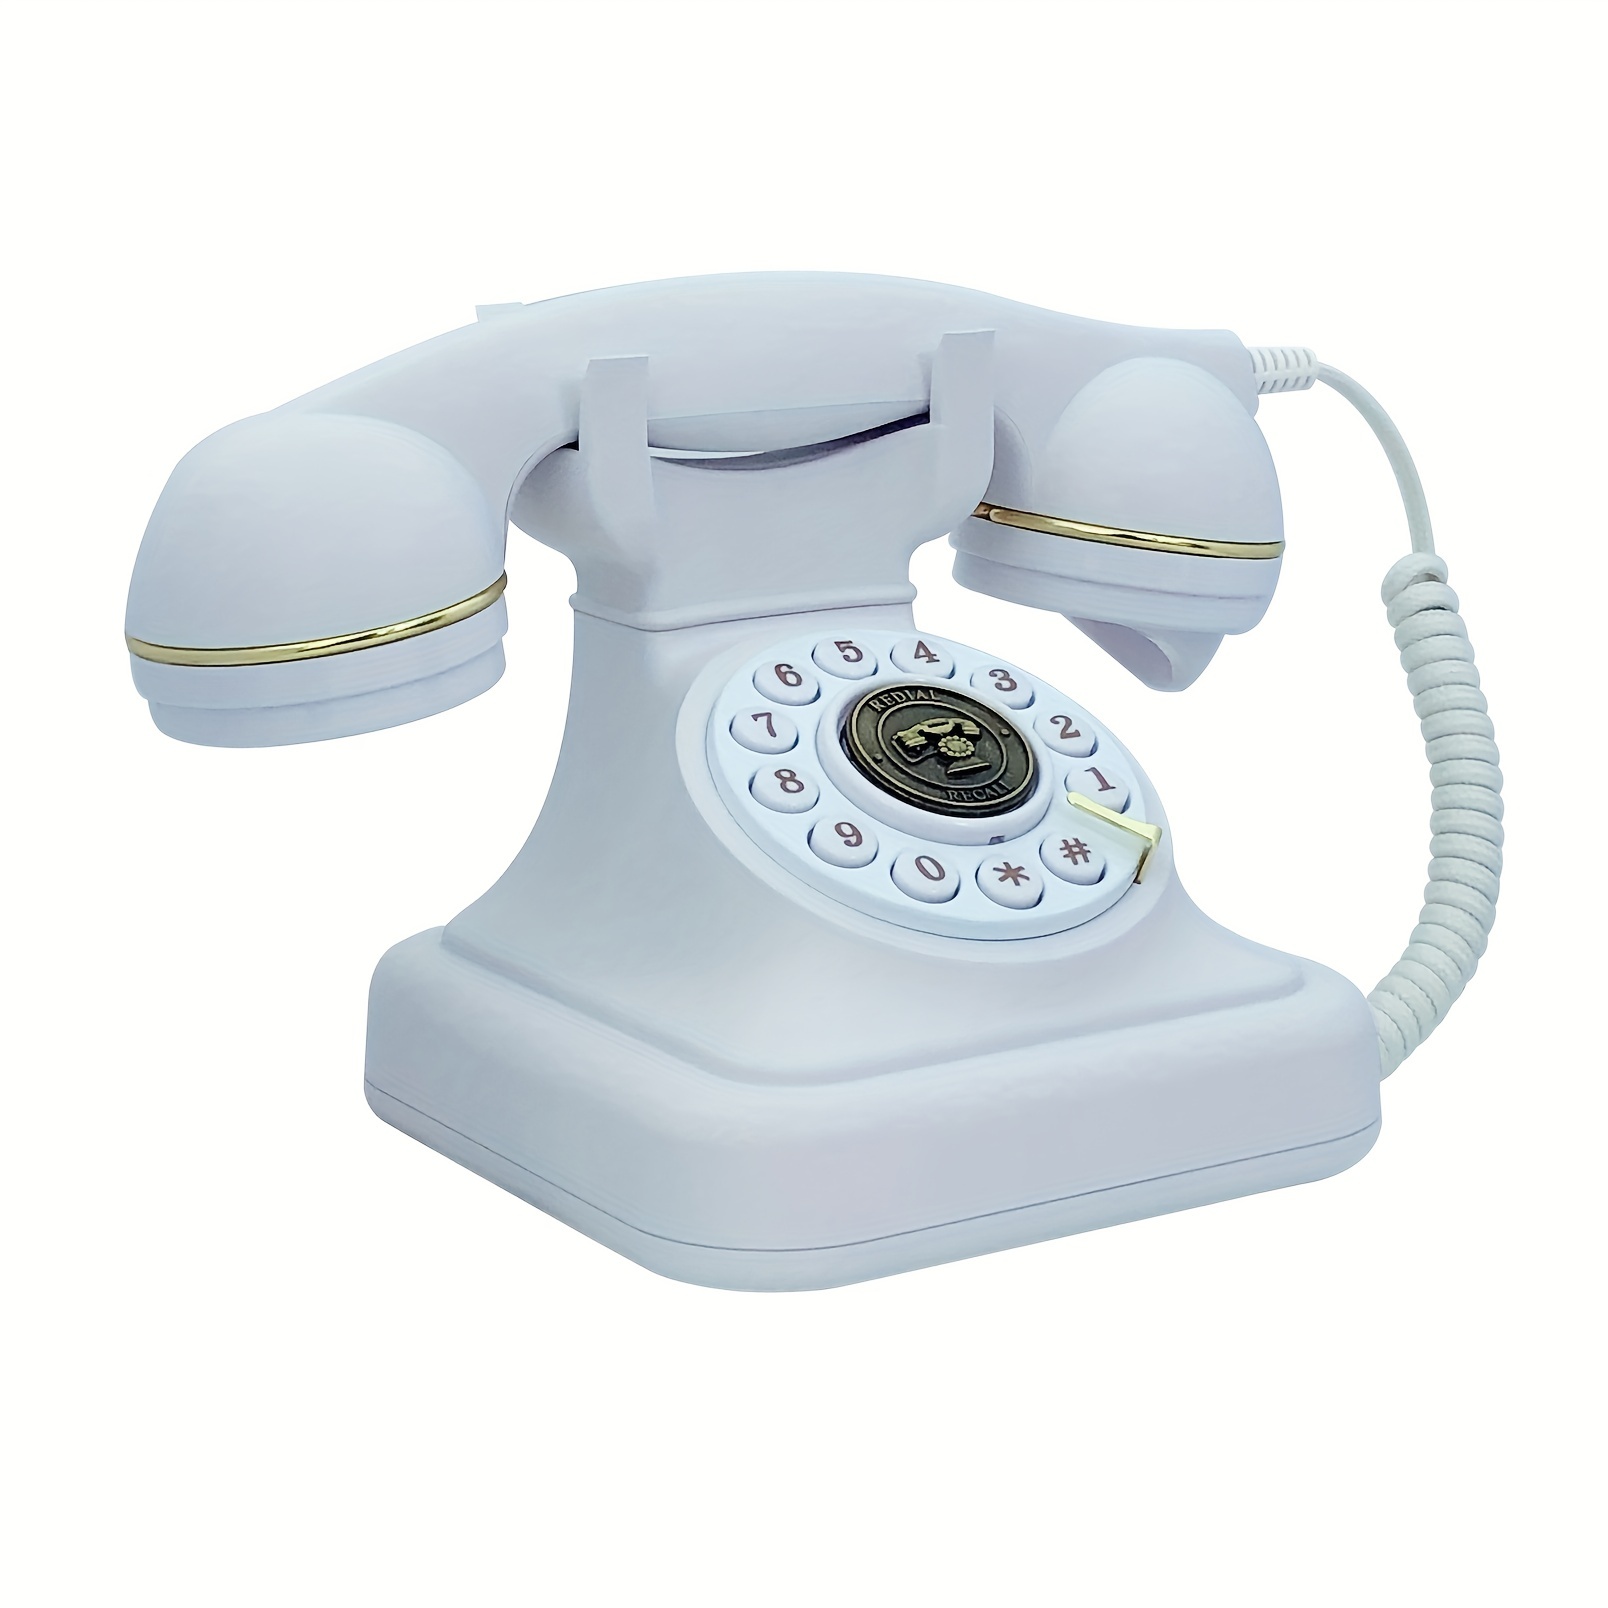 Other Electronics KXT076 Home El Wired Desktop Wall Phone Office Landline  Telephone Black White Telefono Fijo Para Casa Home Phone 230306 From Zuo04,  $16.61